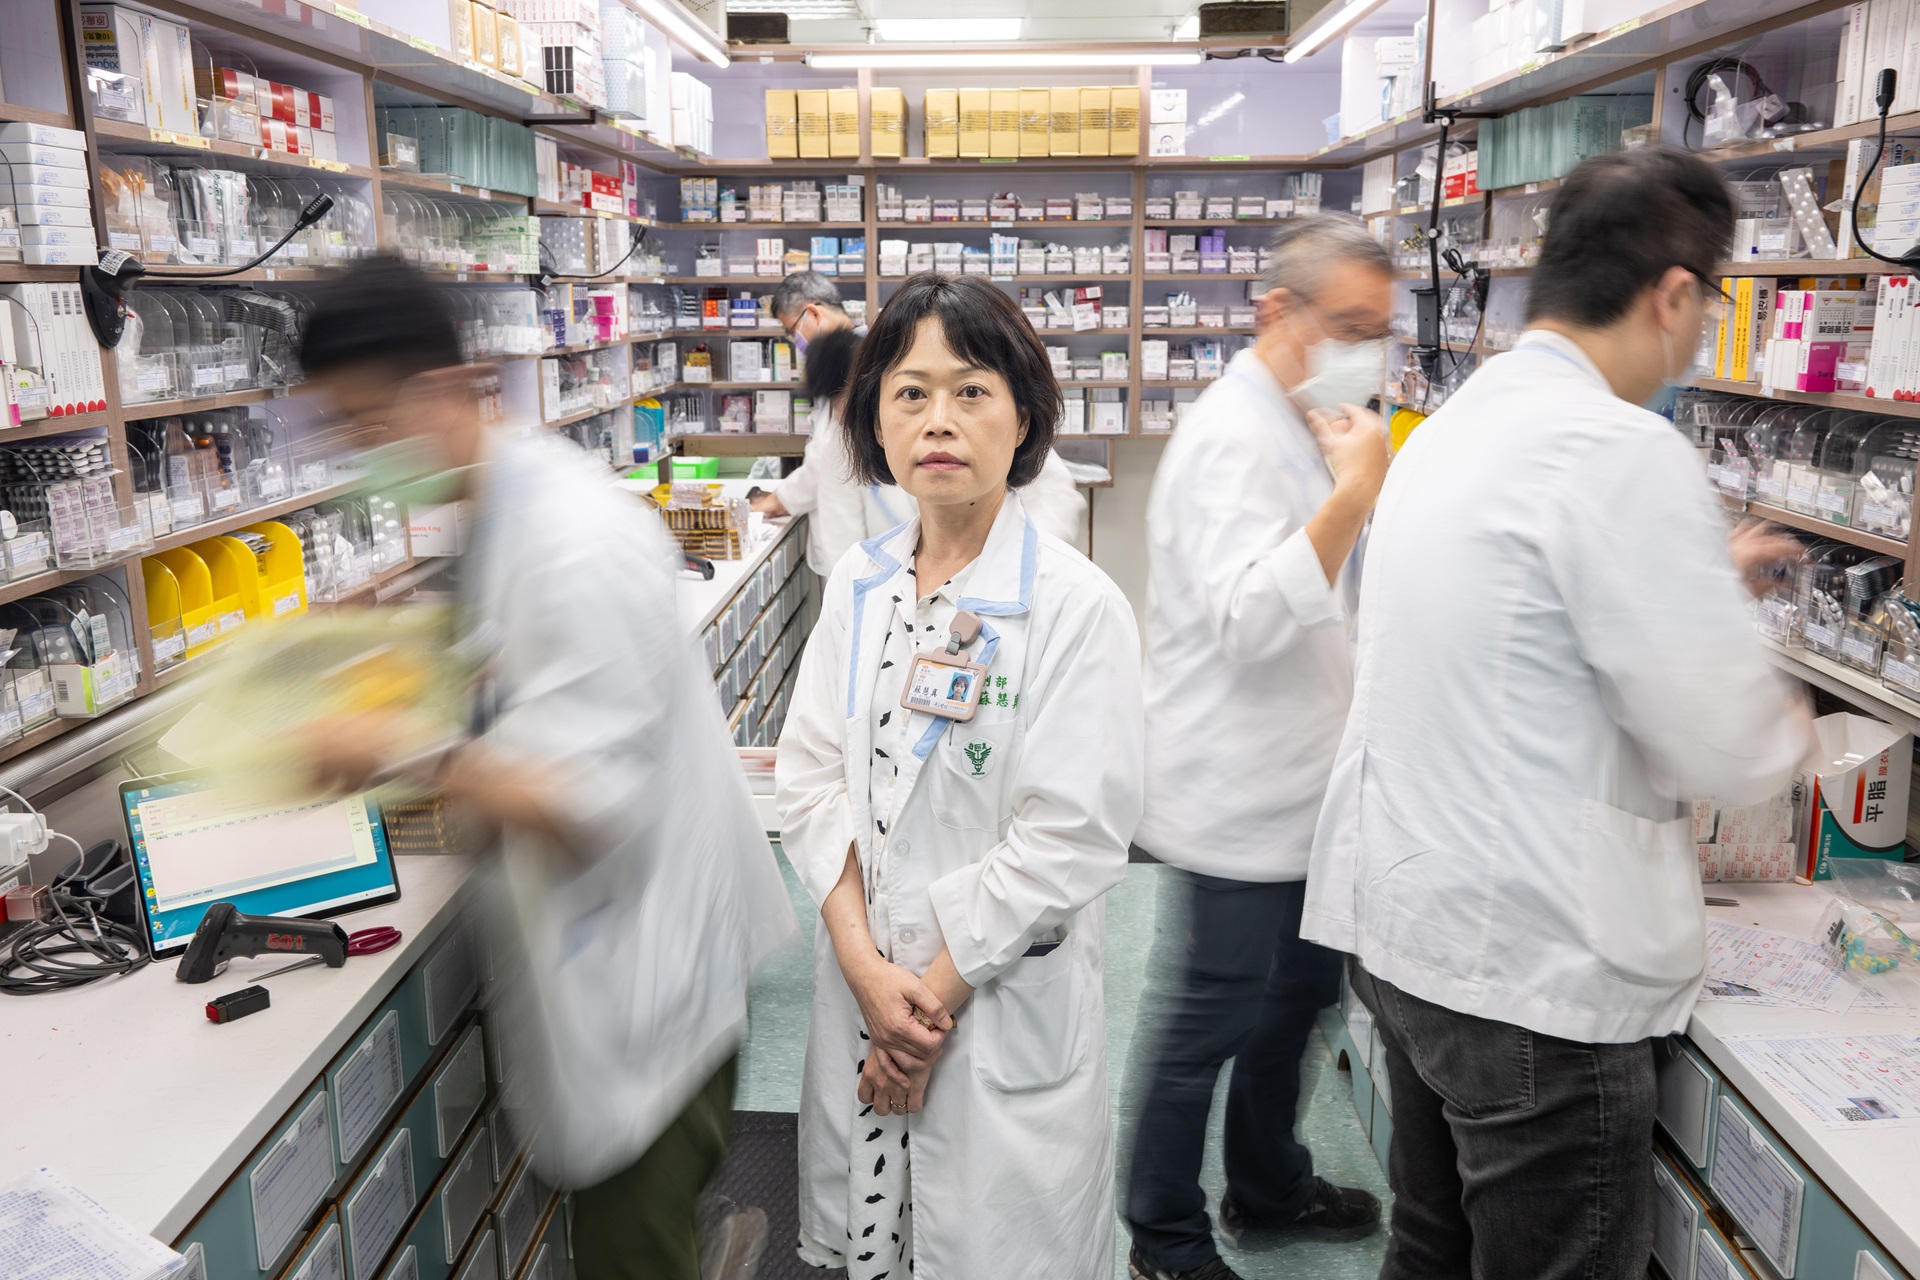 A group of people in a pharmacy